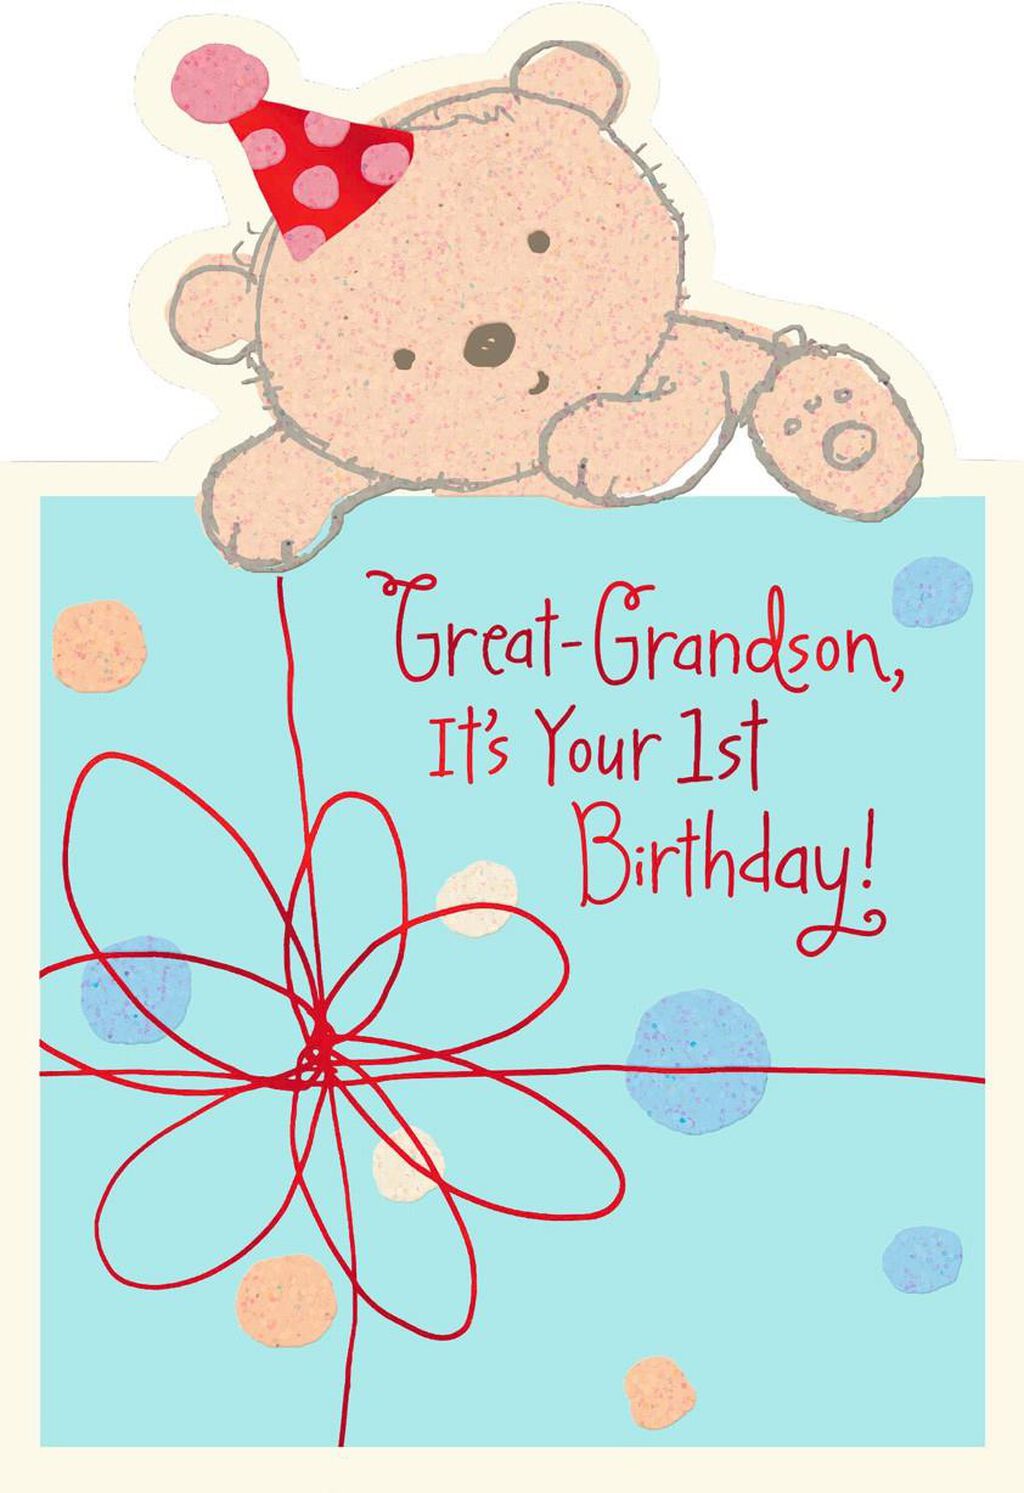 Baby Bear 1st Birthday Card For Great Grandson Greeting Cards